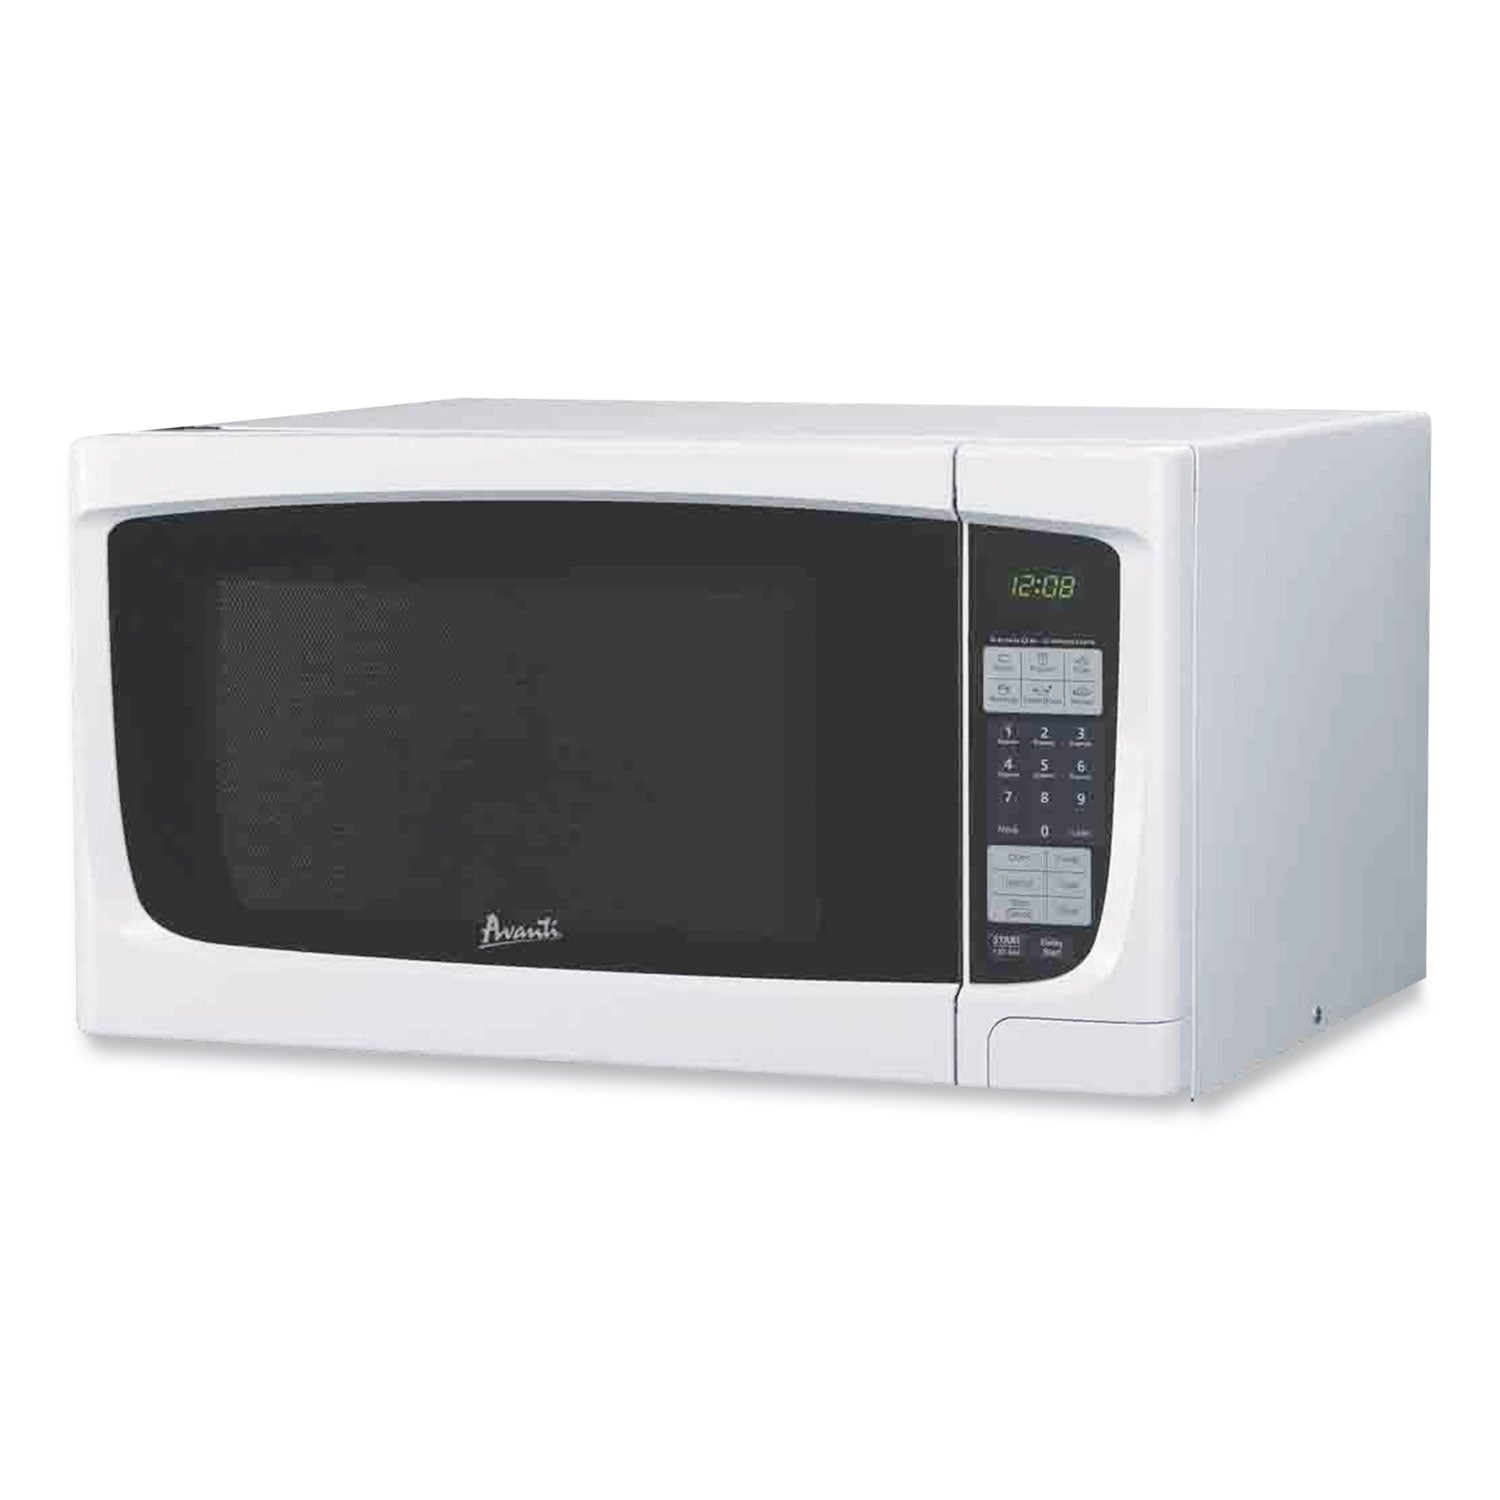 1.4 Cubic Foot Capacity Microwave Oven, 1,000 Watts, White - 